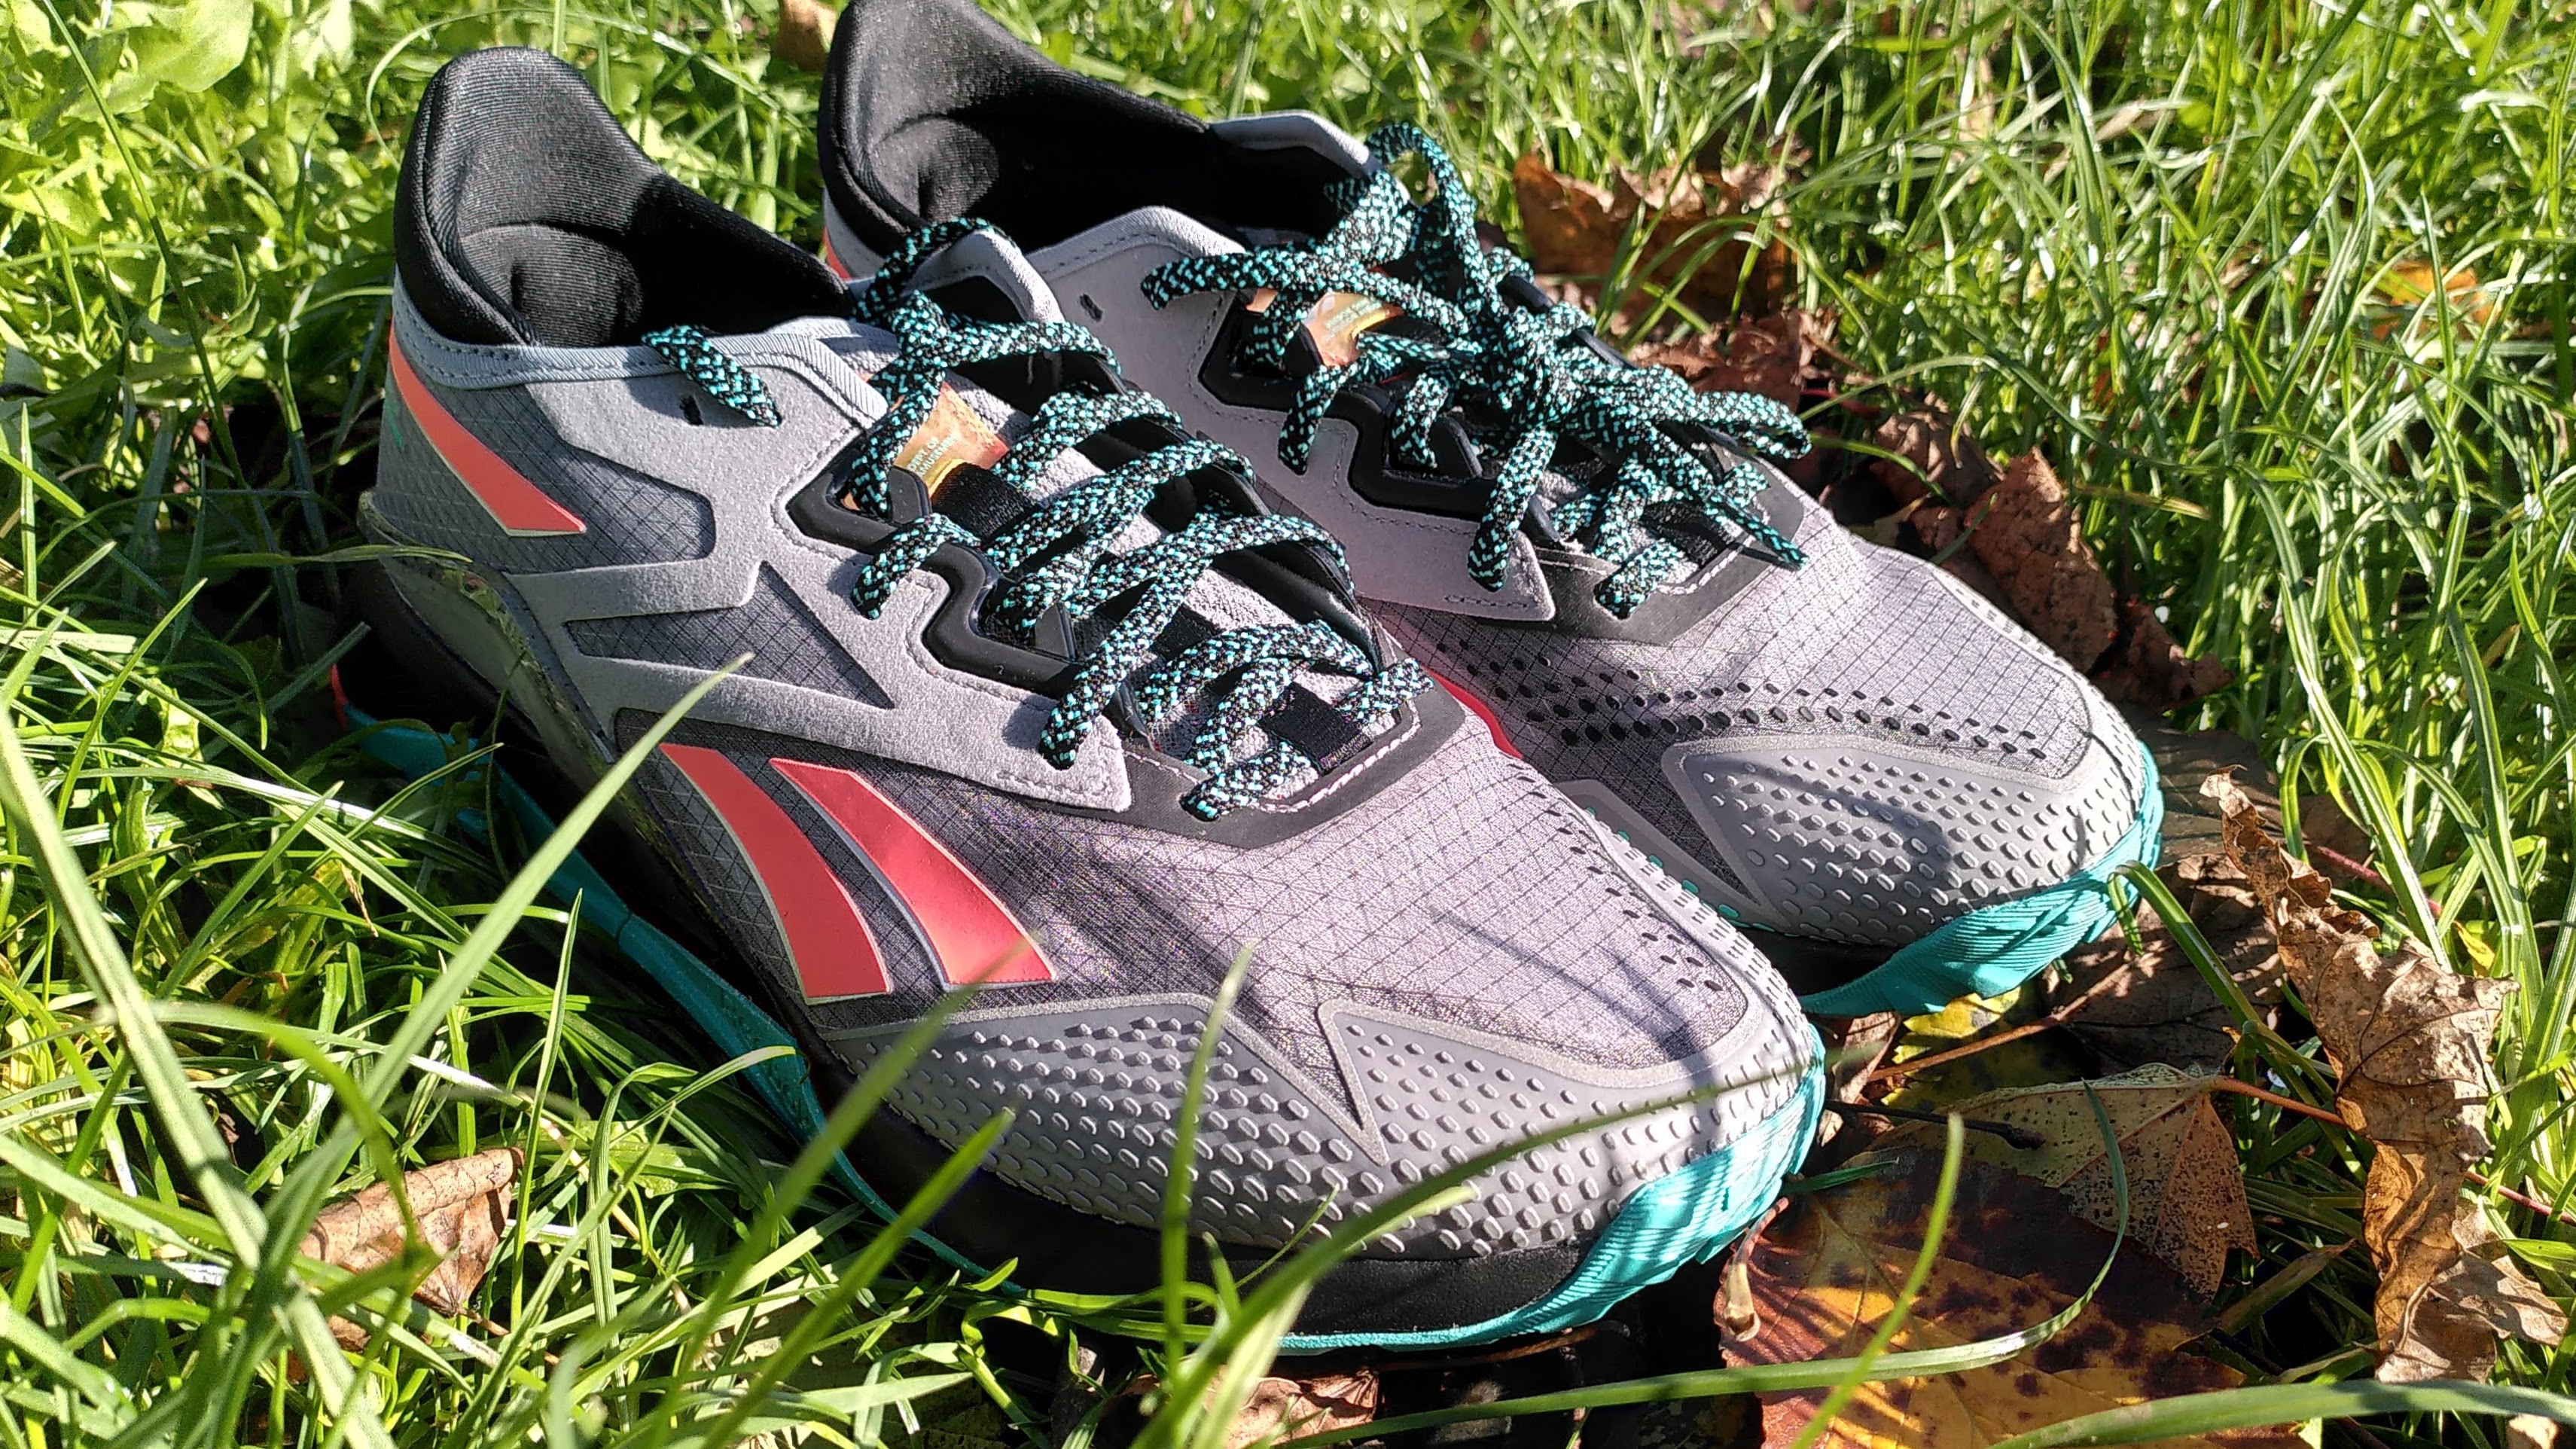 Reebok Nano X Full Review – Our Verdict After a Month of Testing